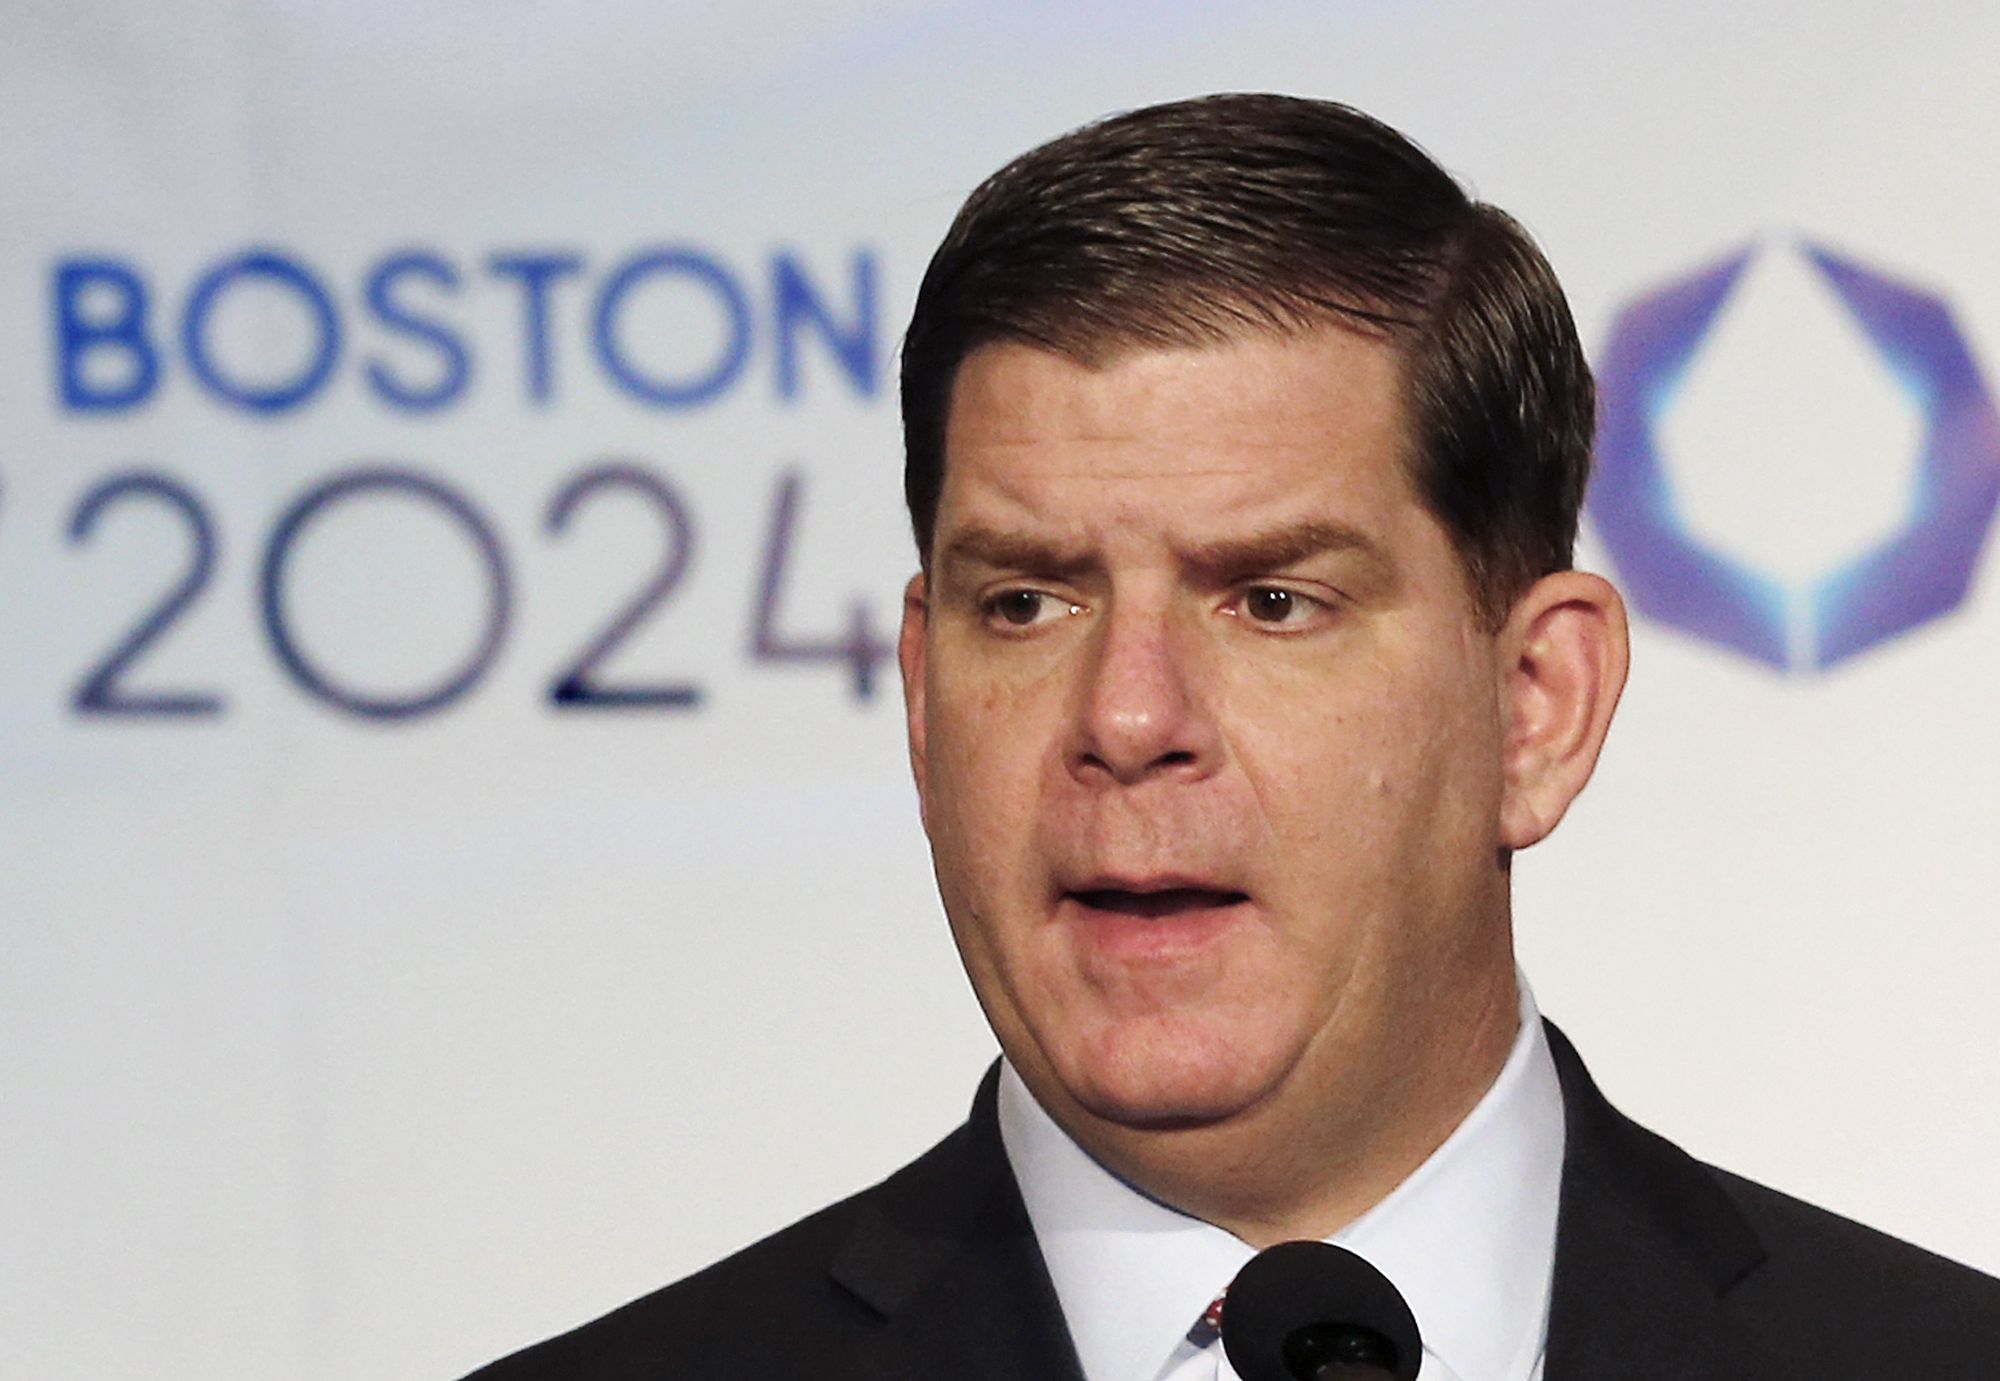 With Boston out for 2024, can Los Angeles revive U.S. Olympic bid?